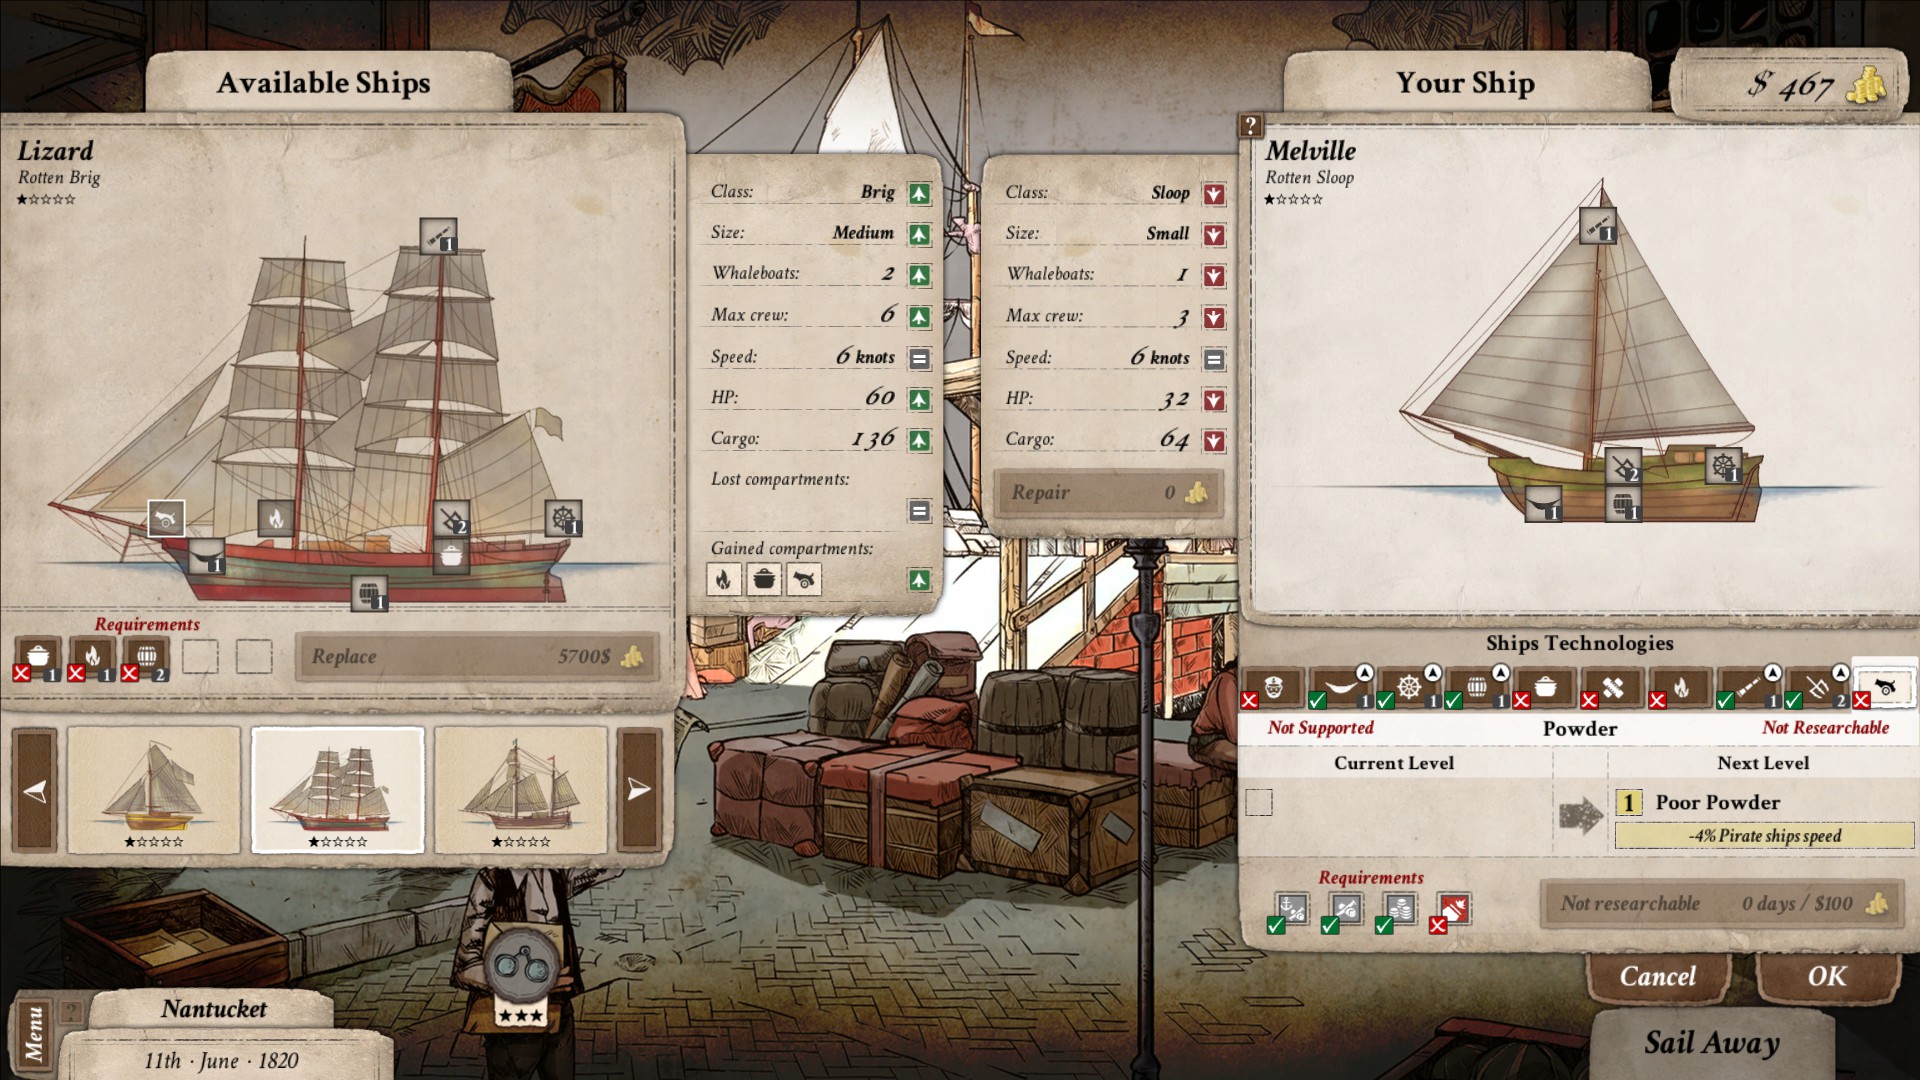 Strategy Game Picks Up Where Moby Dick Left Off